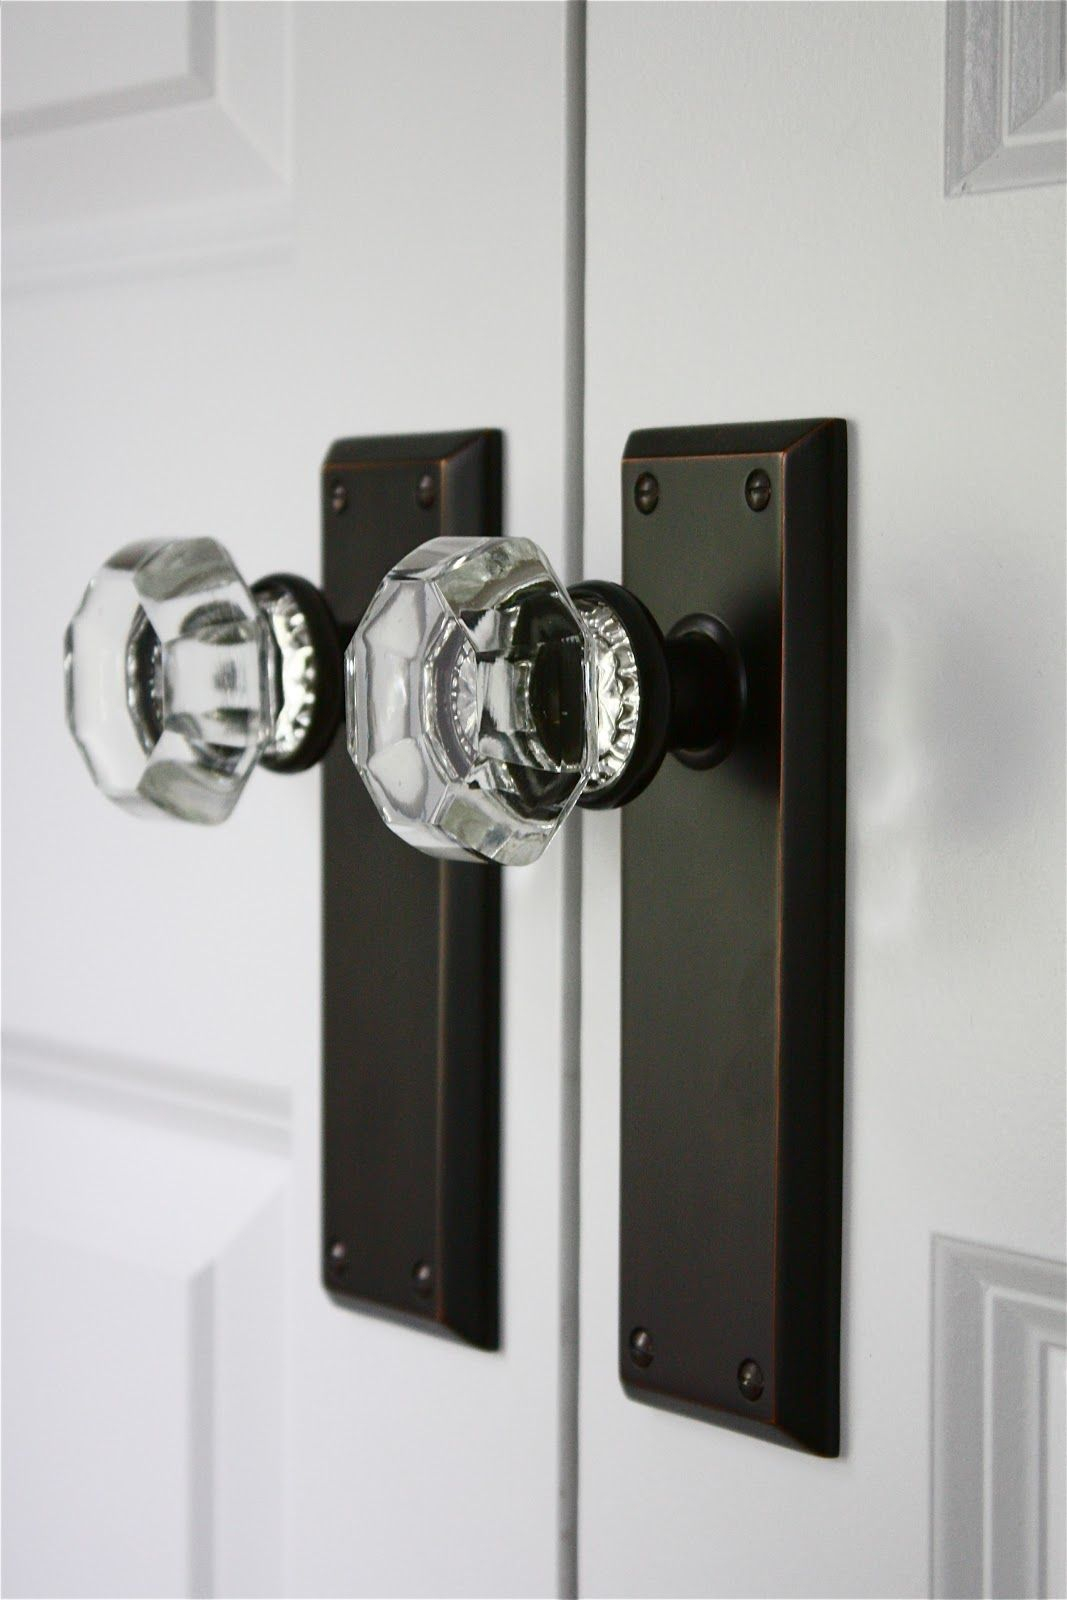 Crystal Door Knobs Home Details Add An Elegant Touch To The Home pertaining to sizing 1067 X 1600